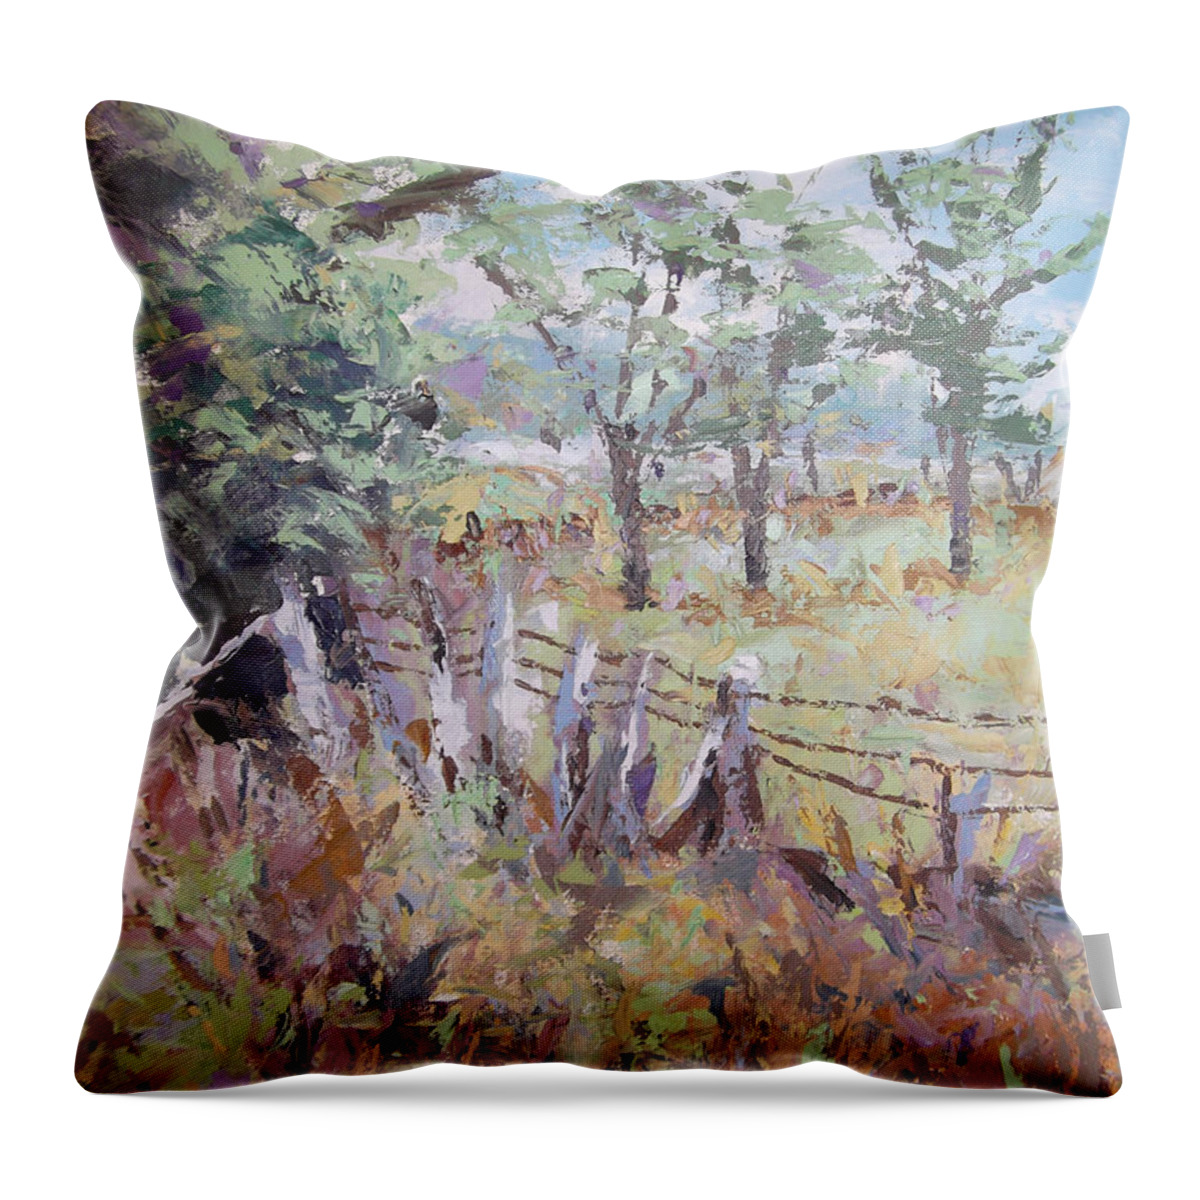 Impressionist Landscape Paintings Throw Pillow featuring the painting Summertime by Cynthia Parsons